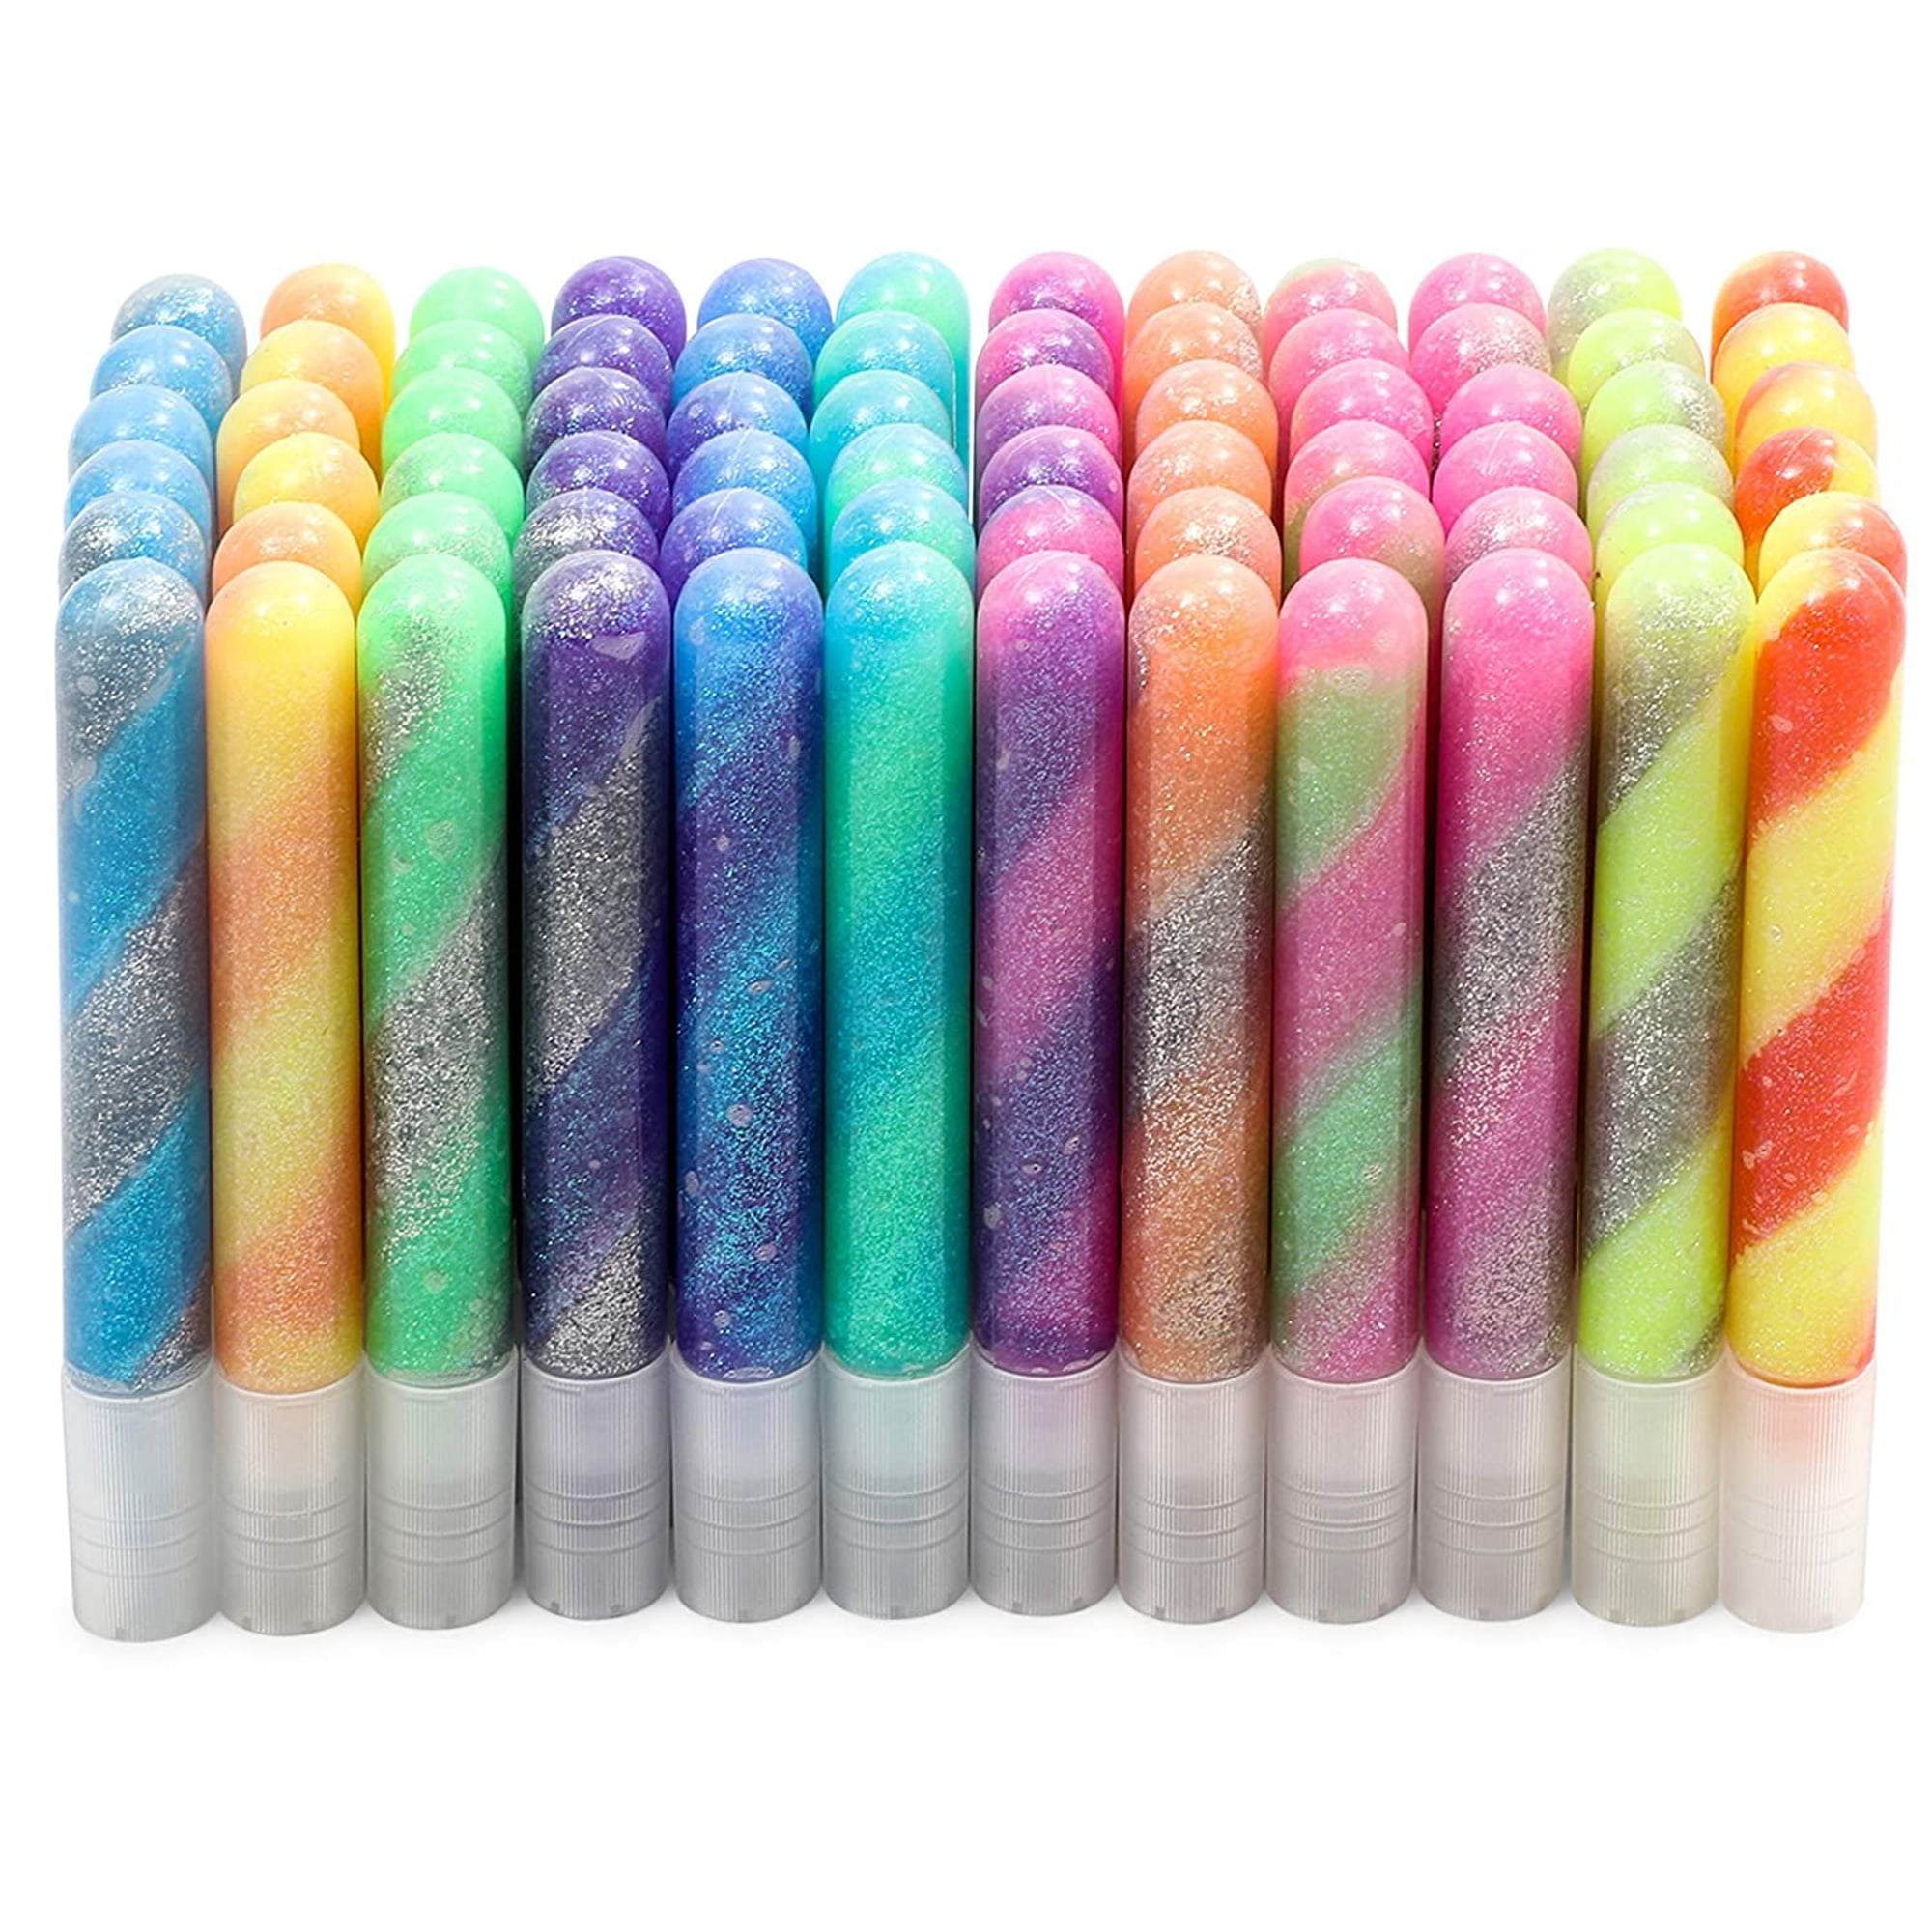 72 Pack Glue with Glitter Gel Pens for Kids, 0.35 Oz Rainbow Glue Stick Set  for Arts and Crafts Projects, Slime Supplies, Scrapbooking, Cards (12